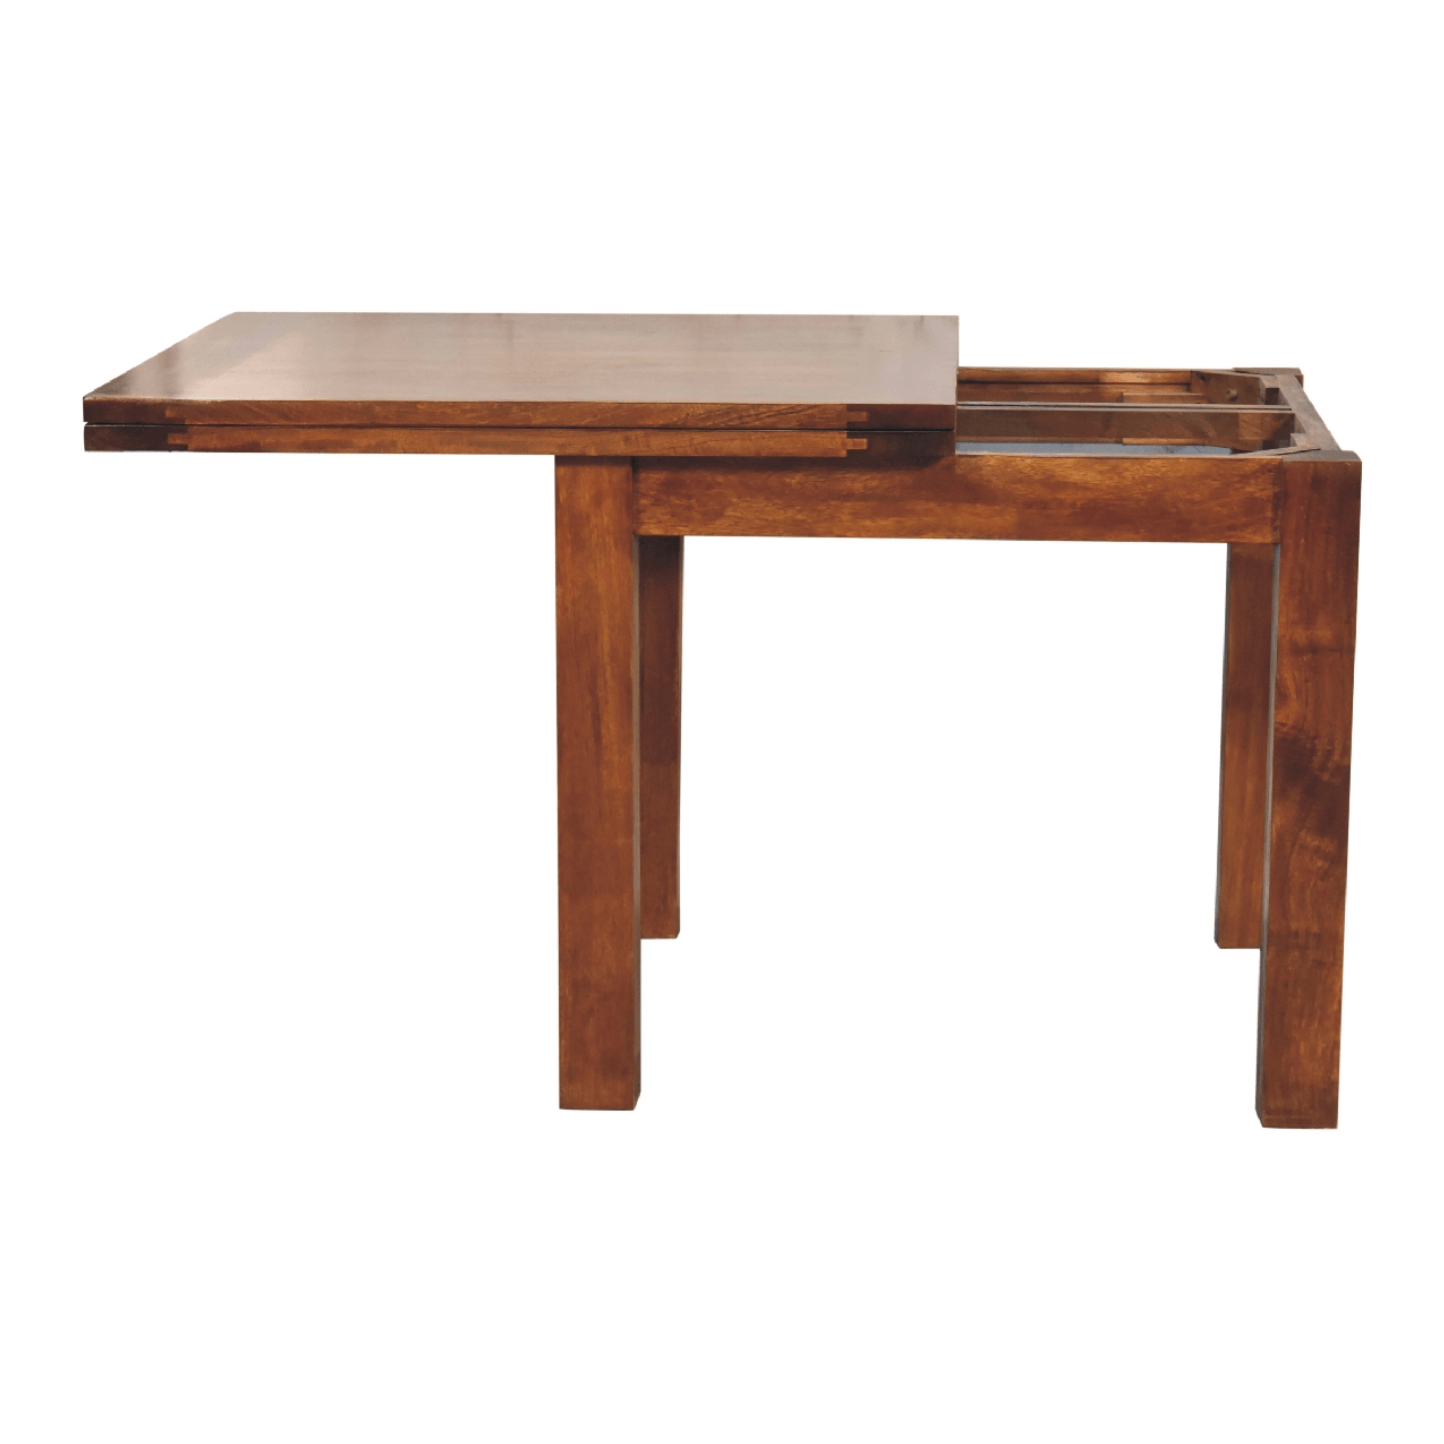 Solid Wood Chestnut Butterfly Extendible Dining Table - Revel Sofa 